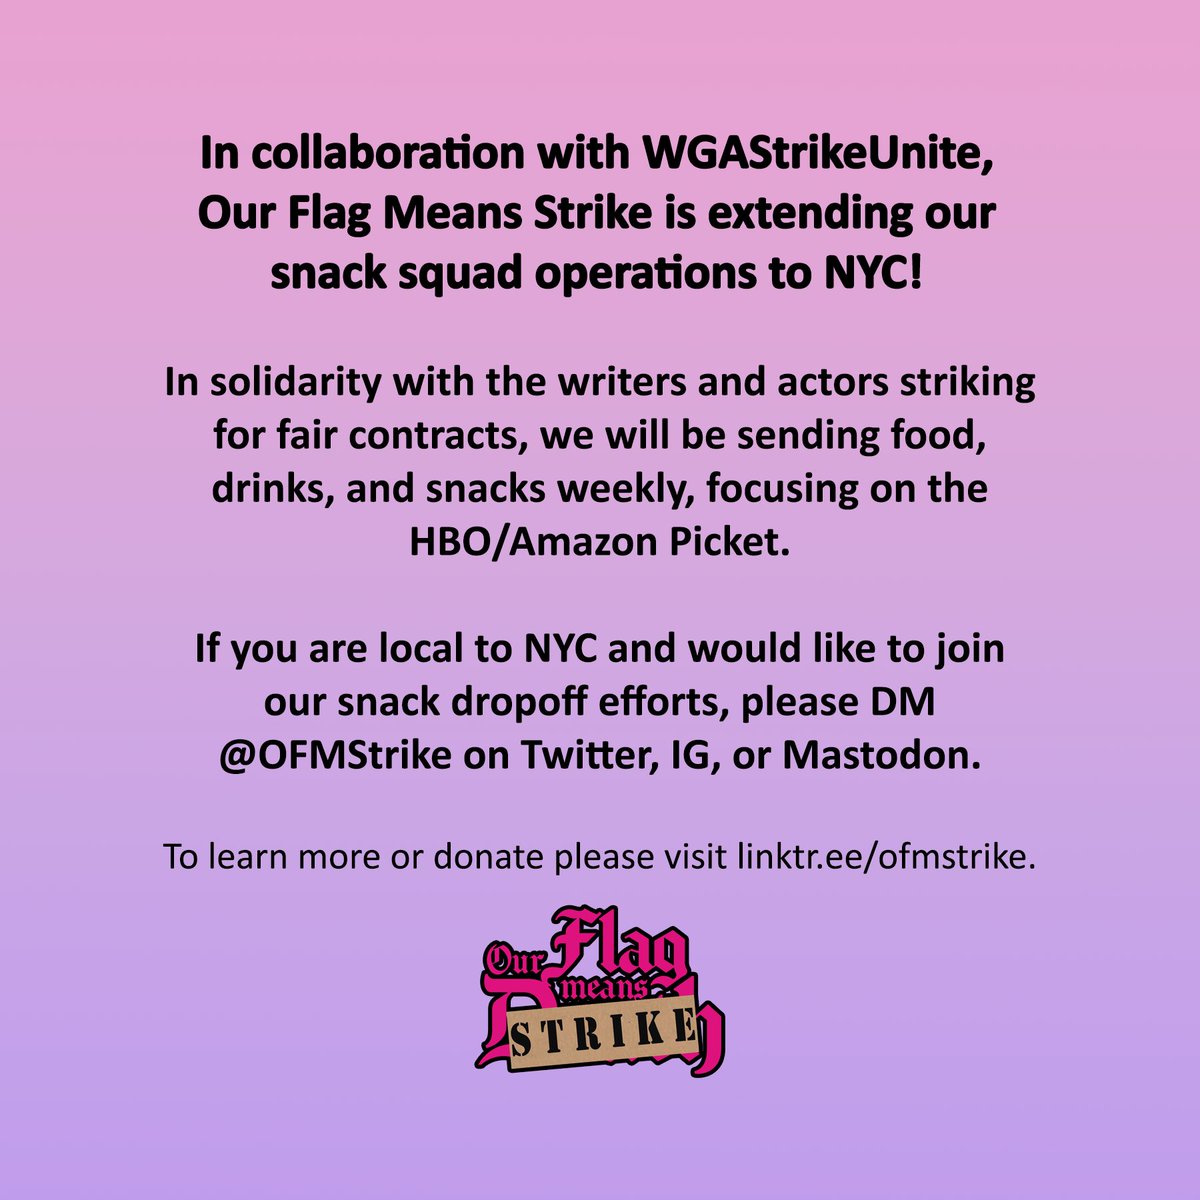 We’re excited to announce we’re teaming up with @wgastrikeunite to extend our operations to both coasts!

Double the pickets, double the support and solidarity 🏴‍☠️

#OFMStrike #WGAstrong #WGAstrike #SagAftraStrong #SAGAFTRAstrike